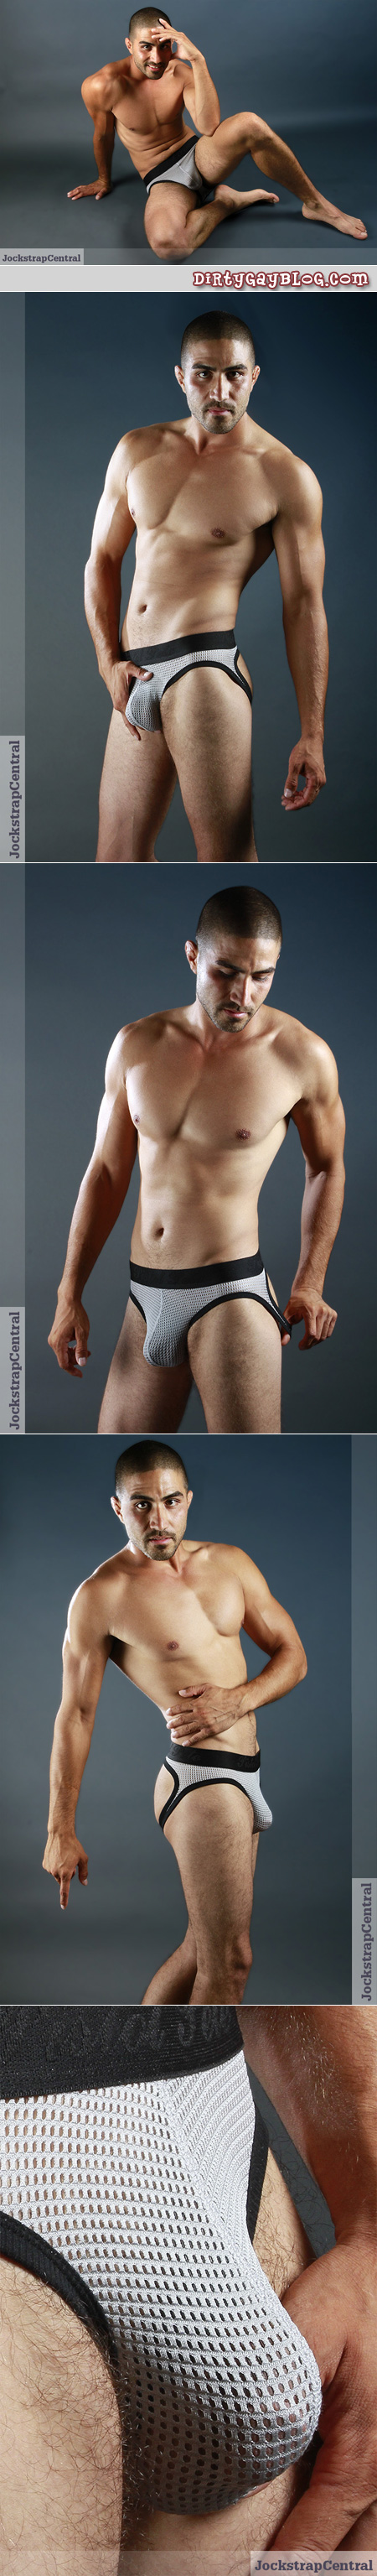 Fit Latino modeling an ass-less silver mesh brief.